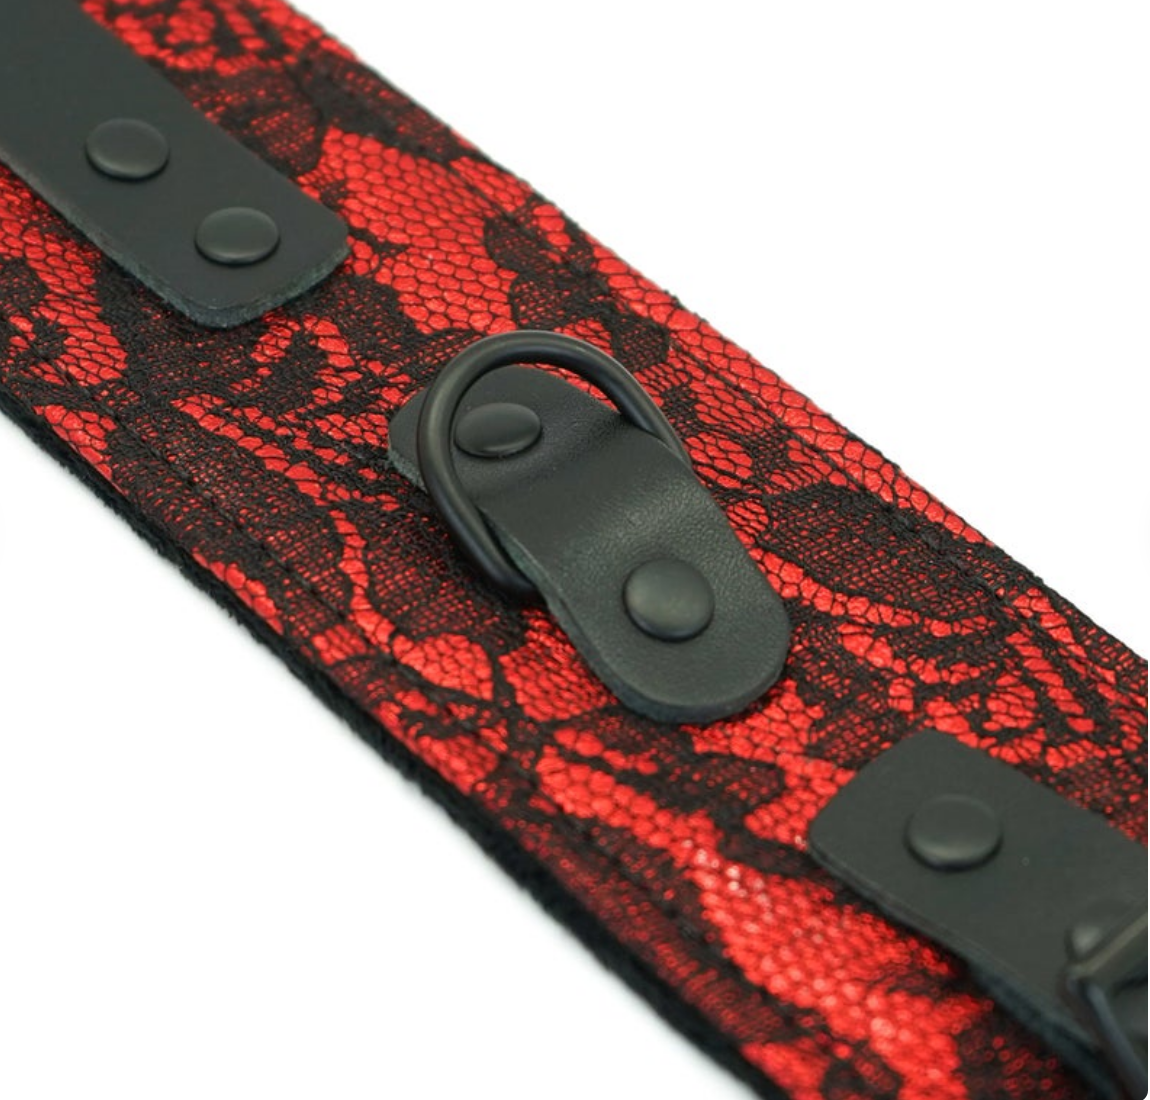 A pair of red and black bondage handcuffs with a chain link connection